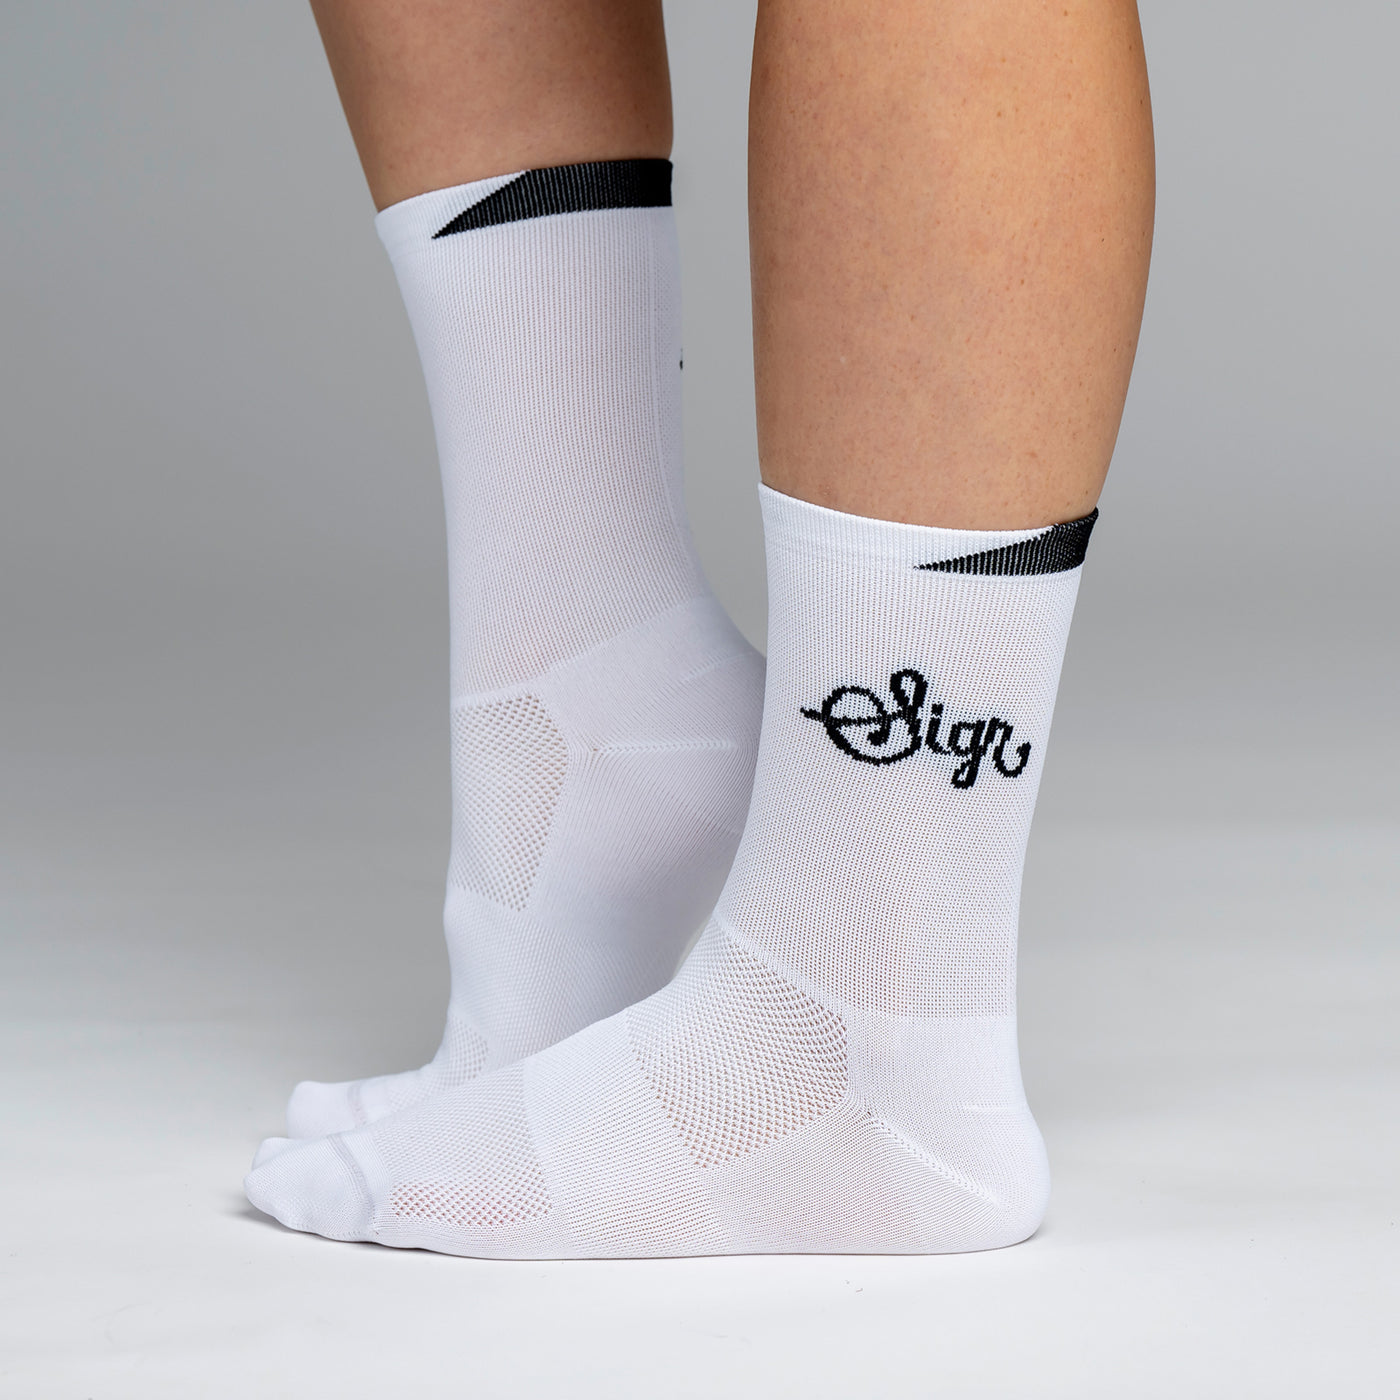 Snok - White Cycling Socks for Women - Pack of 2 pairs